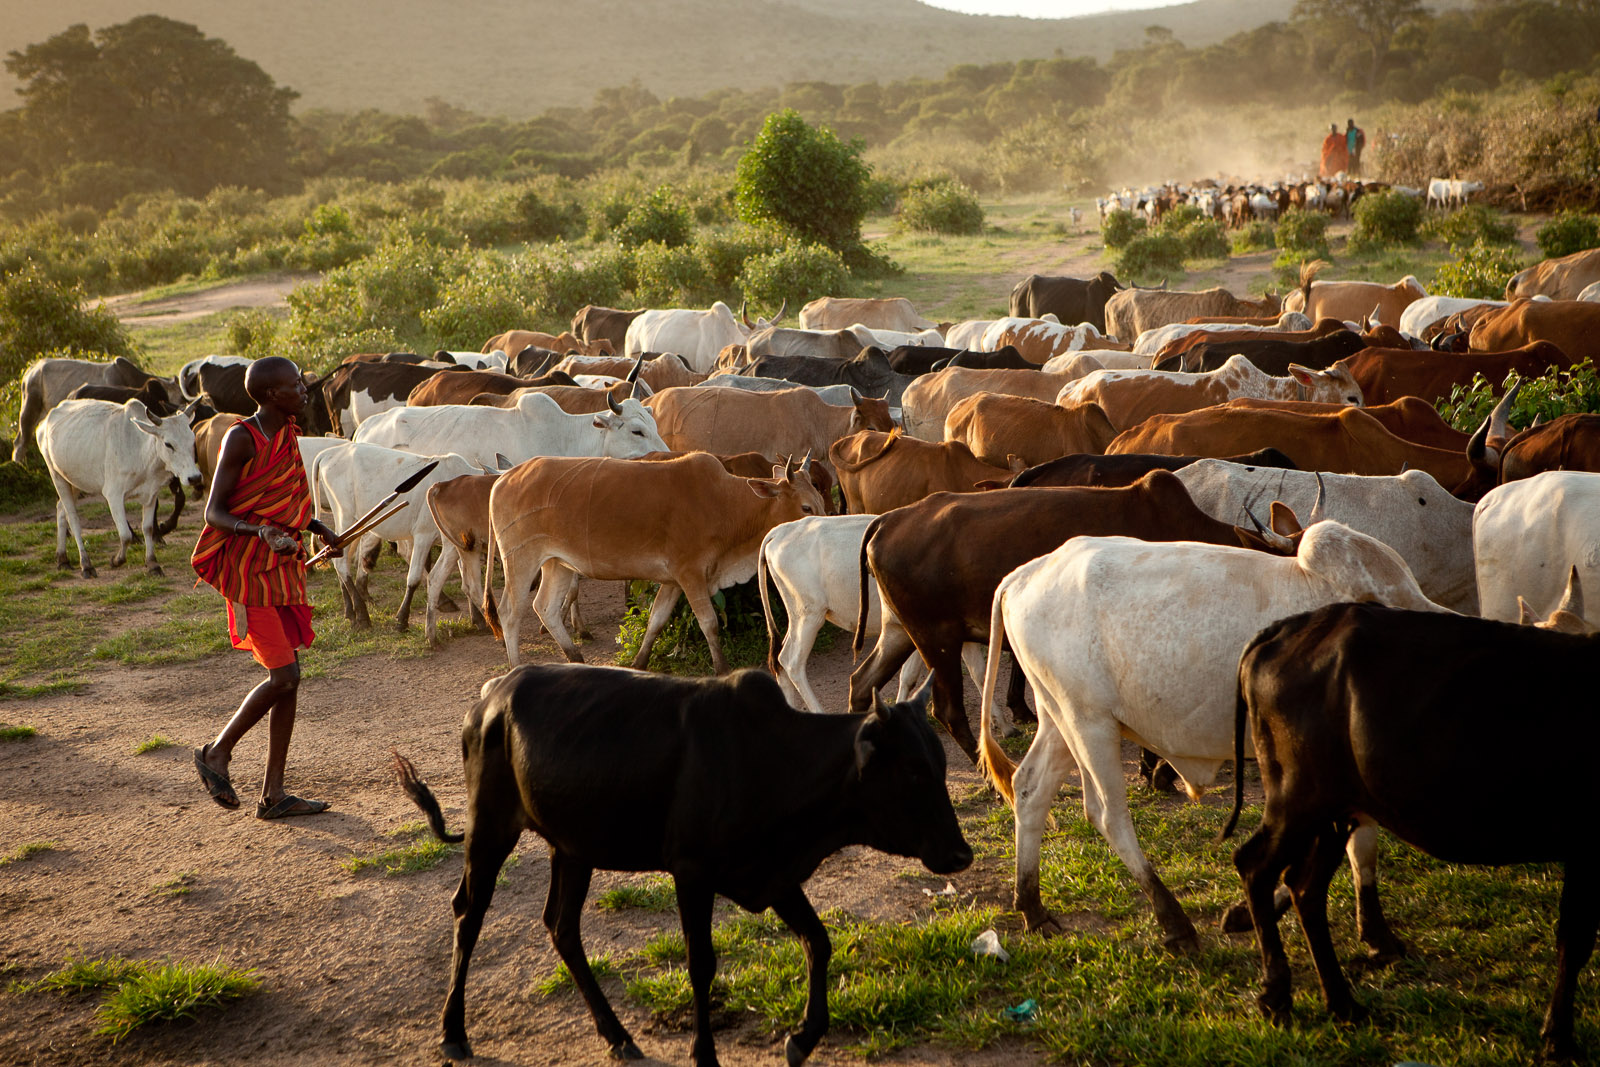  The Maasai diet consists of raw meat, raw milk, and raw blood from cattle. 